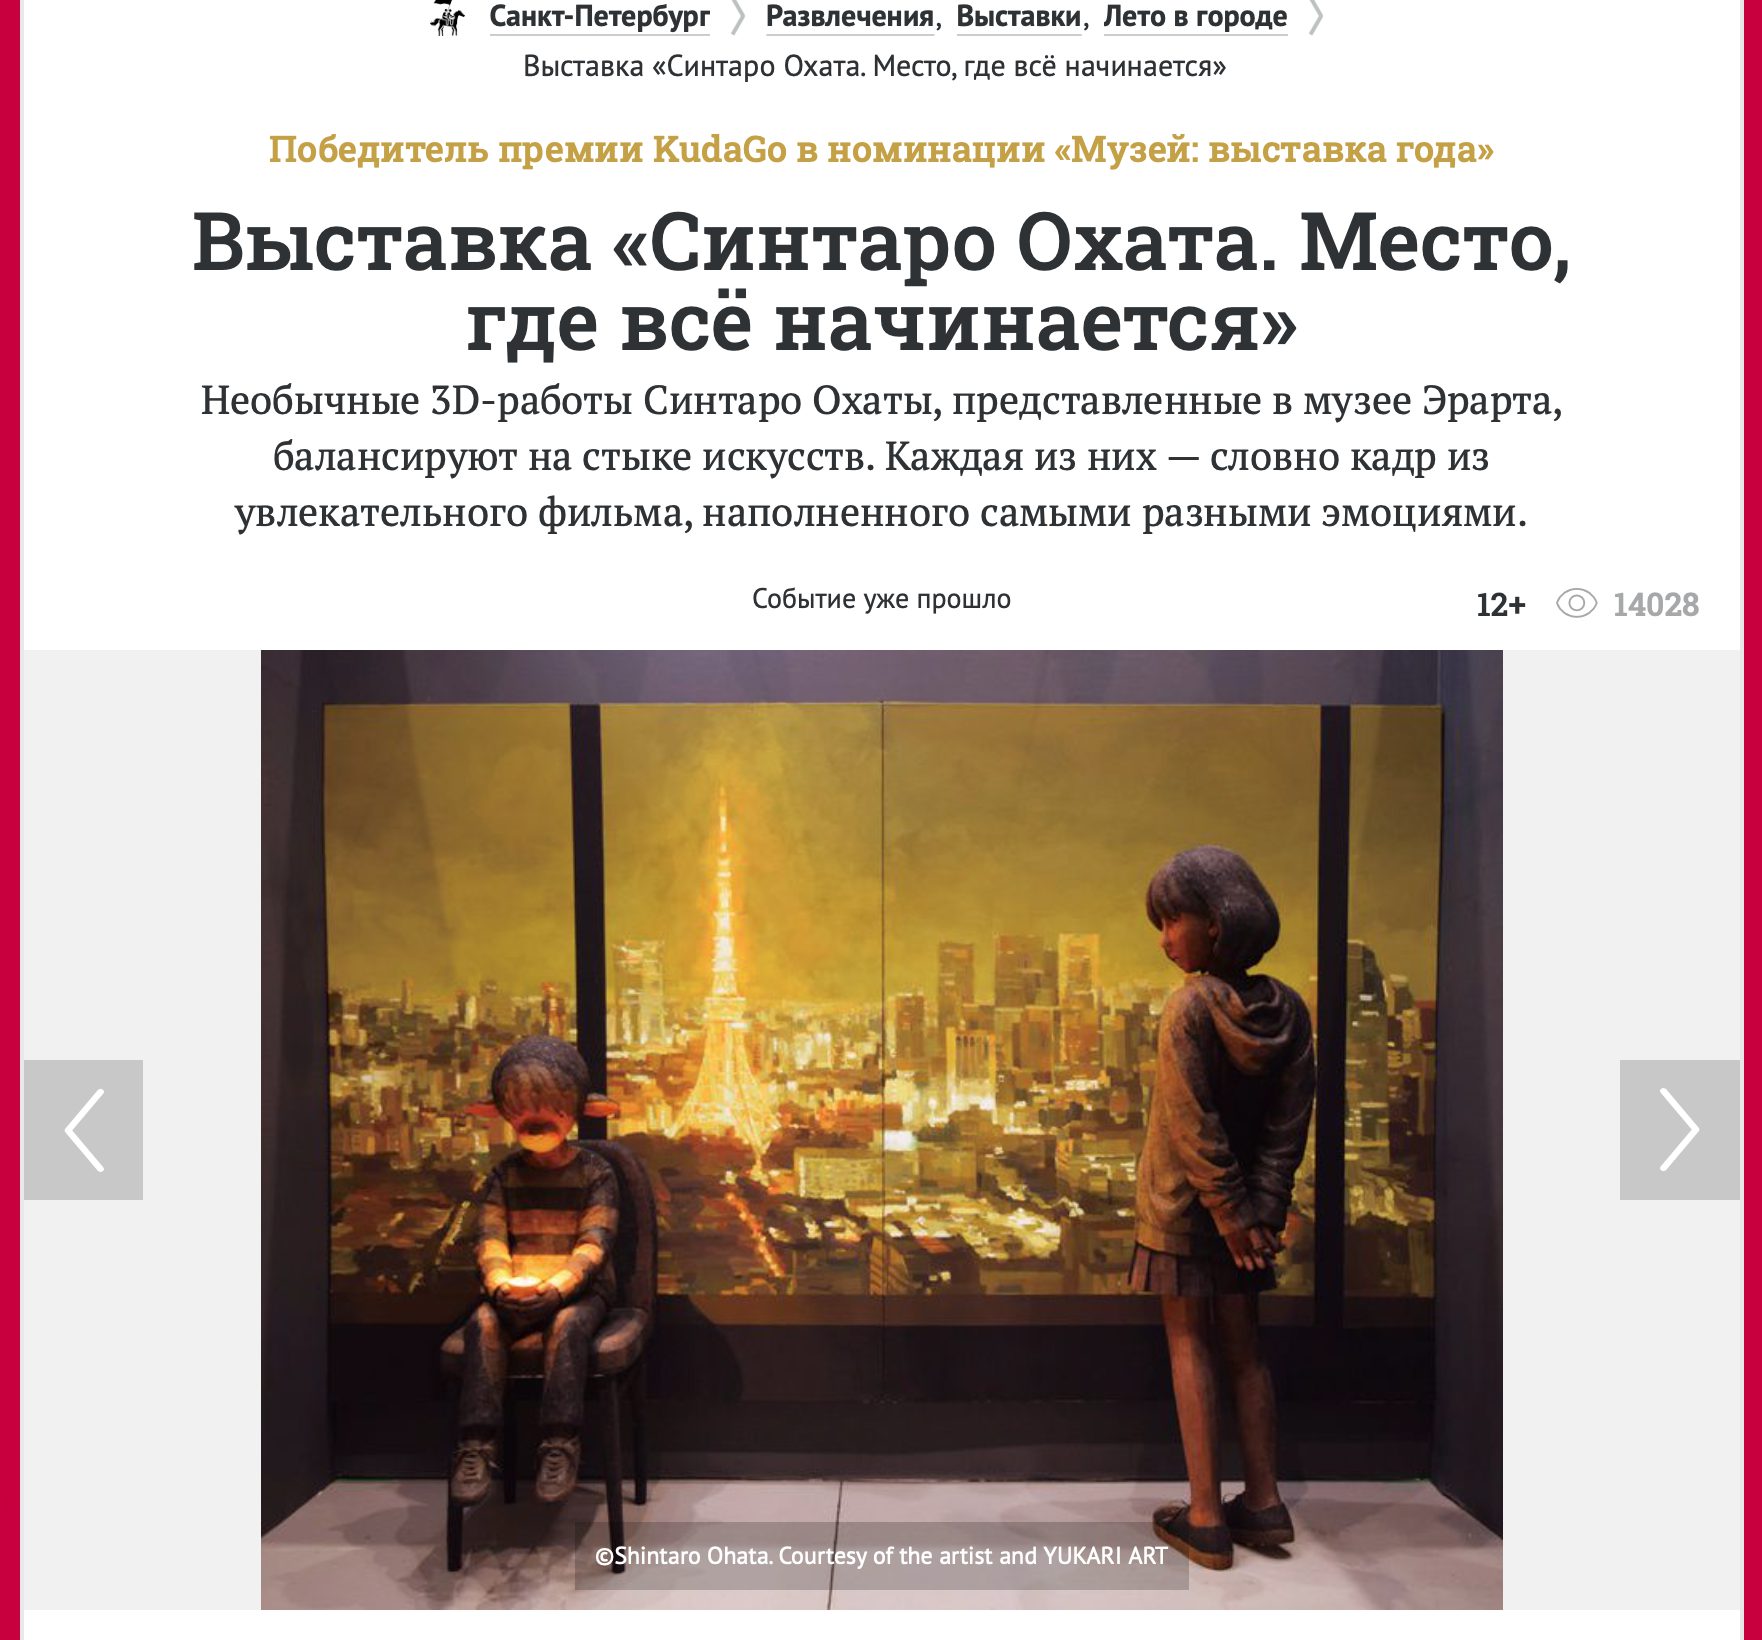 2021 Best Exhibition Award! Ohata's solo museum show in Saint Petersburg